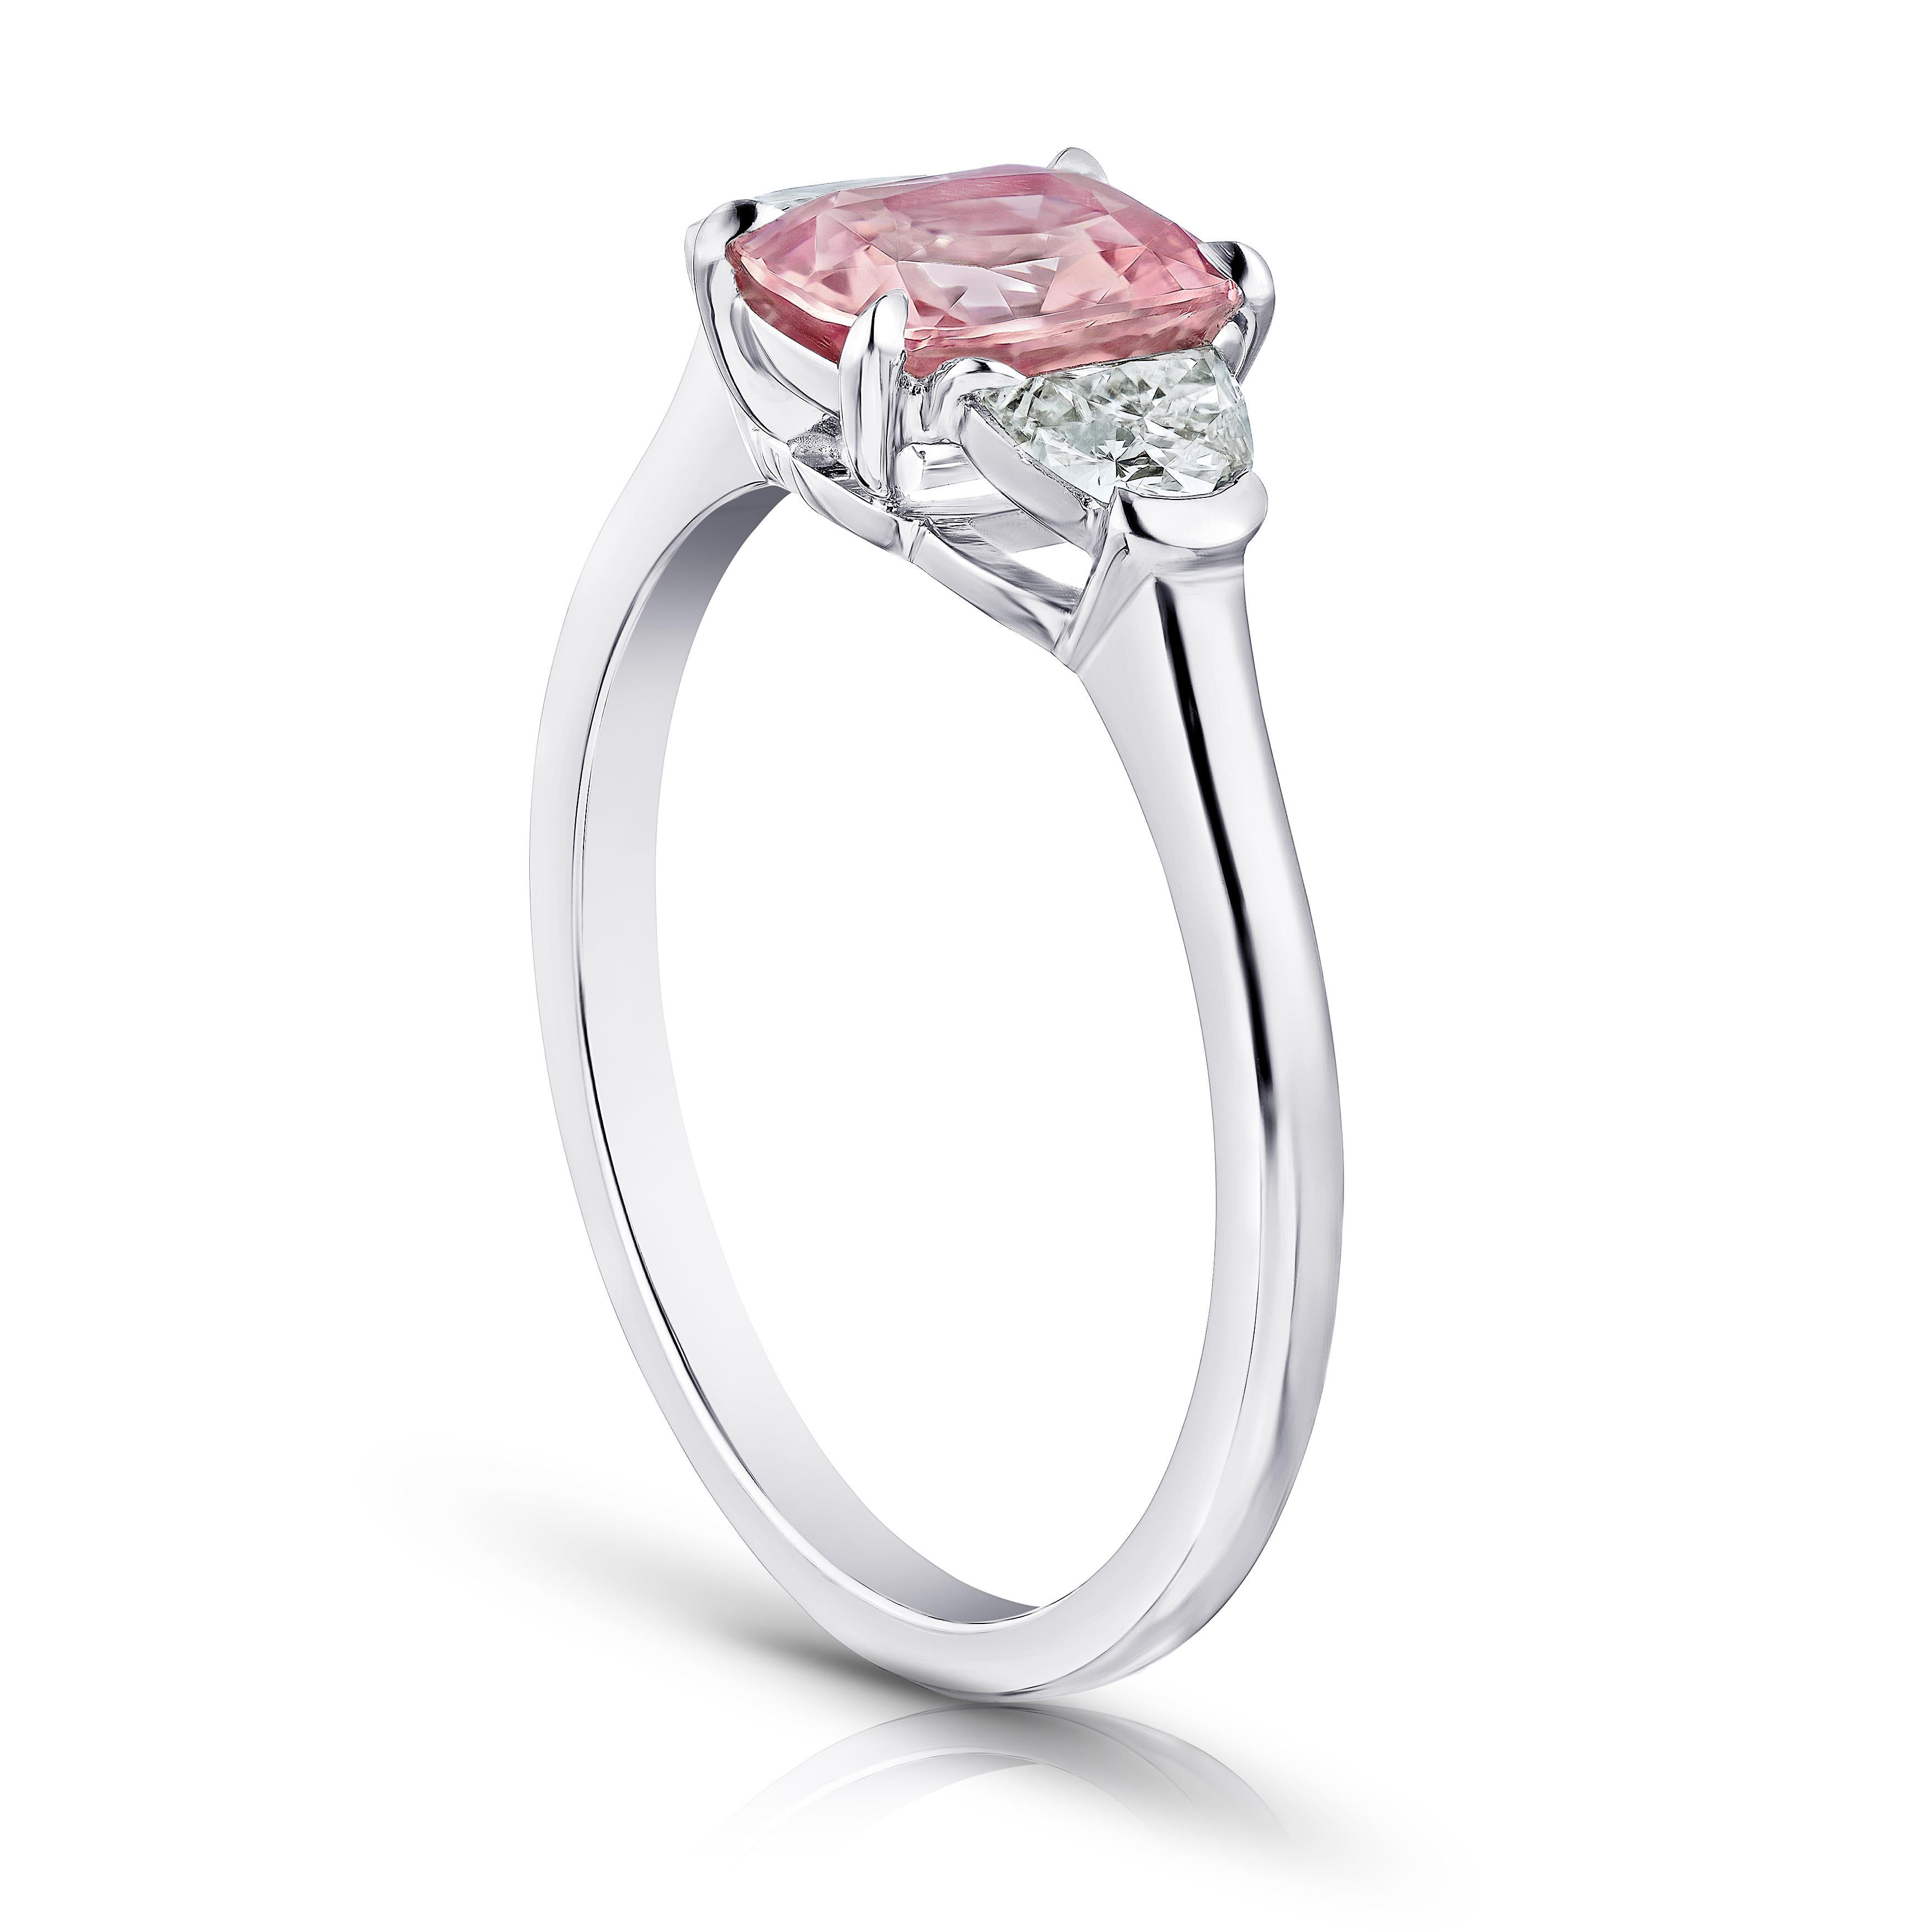 1.29 carat cushion padparadscha sapphire (NH) with half moon diamonds .35 carats set in a platinum ring. This ring is currently a size 7.  We will resize to your finger size without charge.
